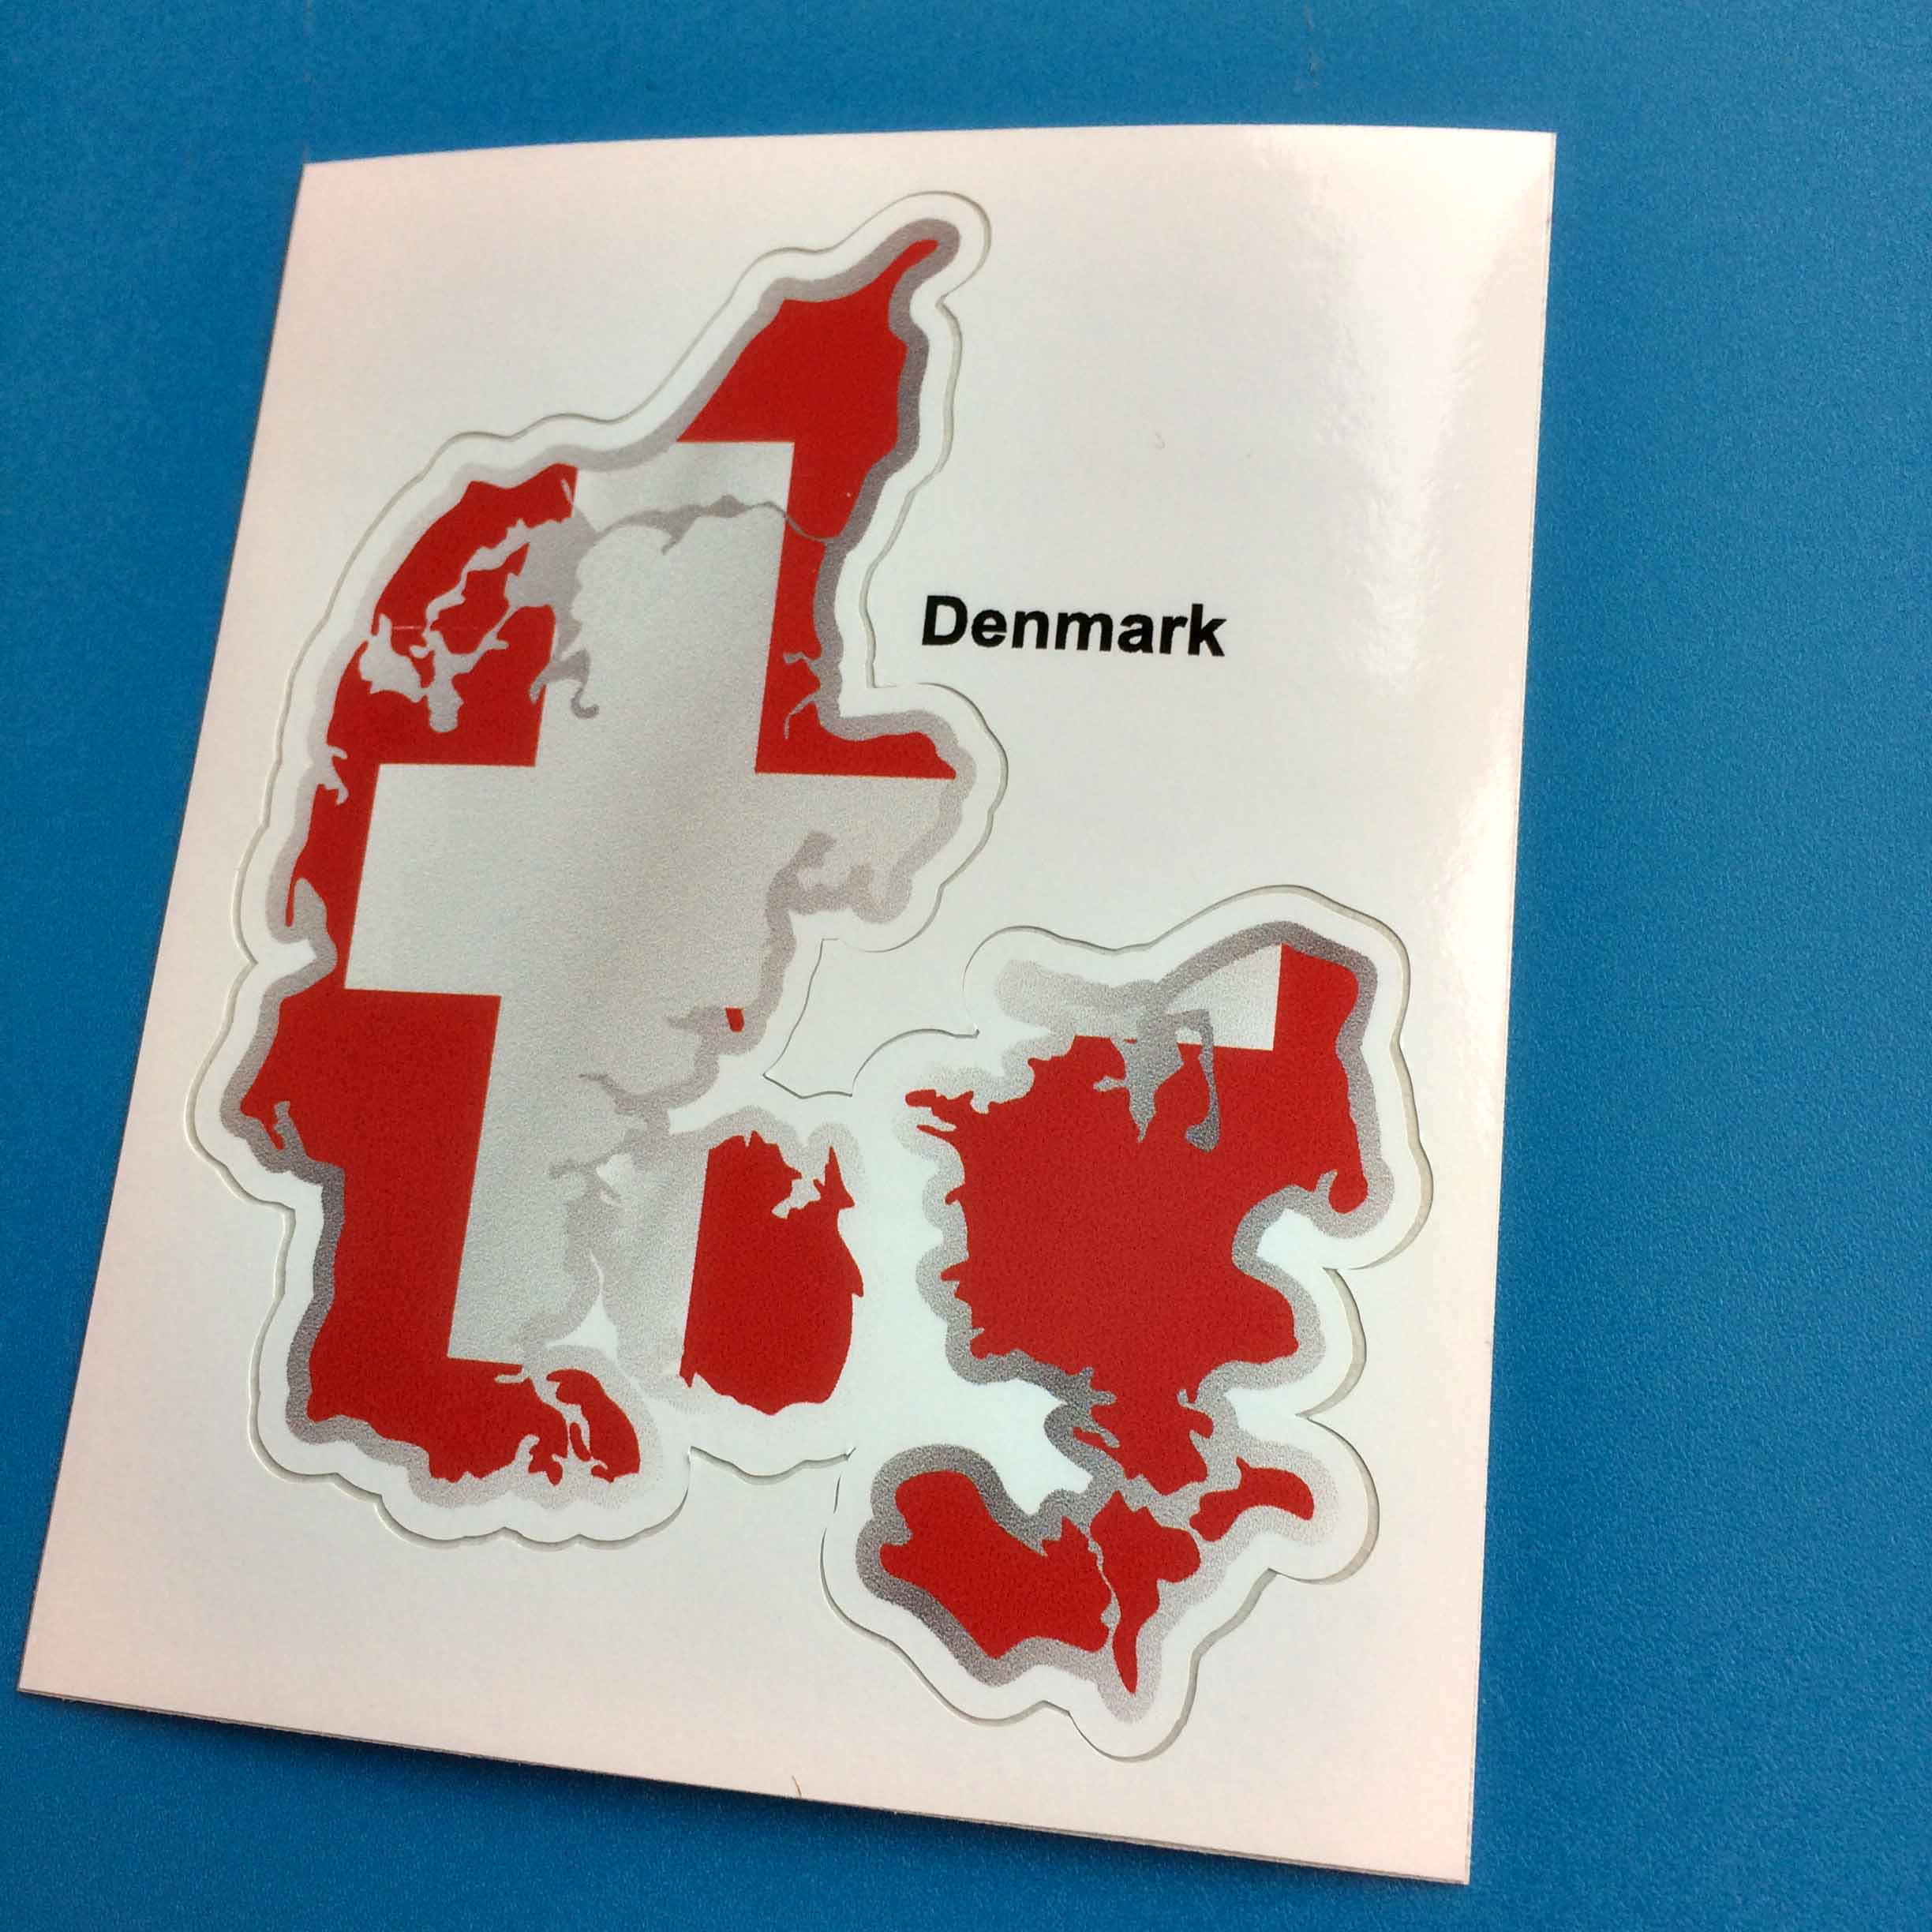 A flag and map of Denmark. A white cross on a red background.